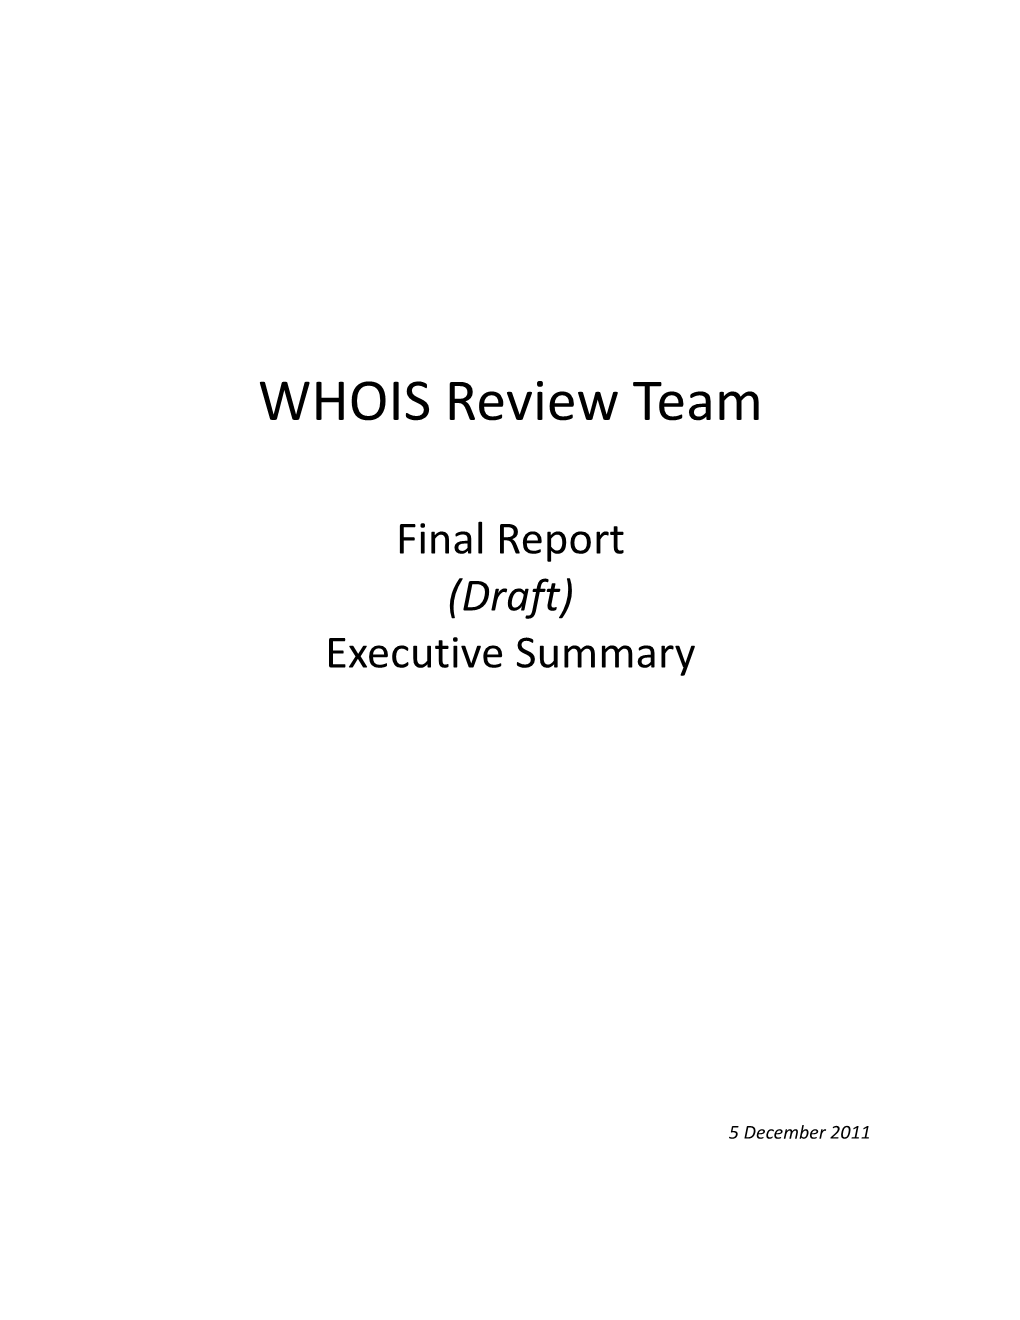 WHOIS Review Team